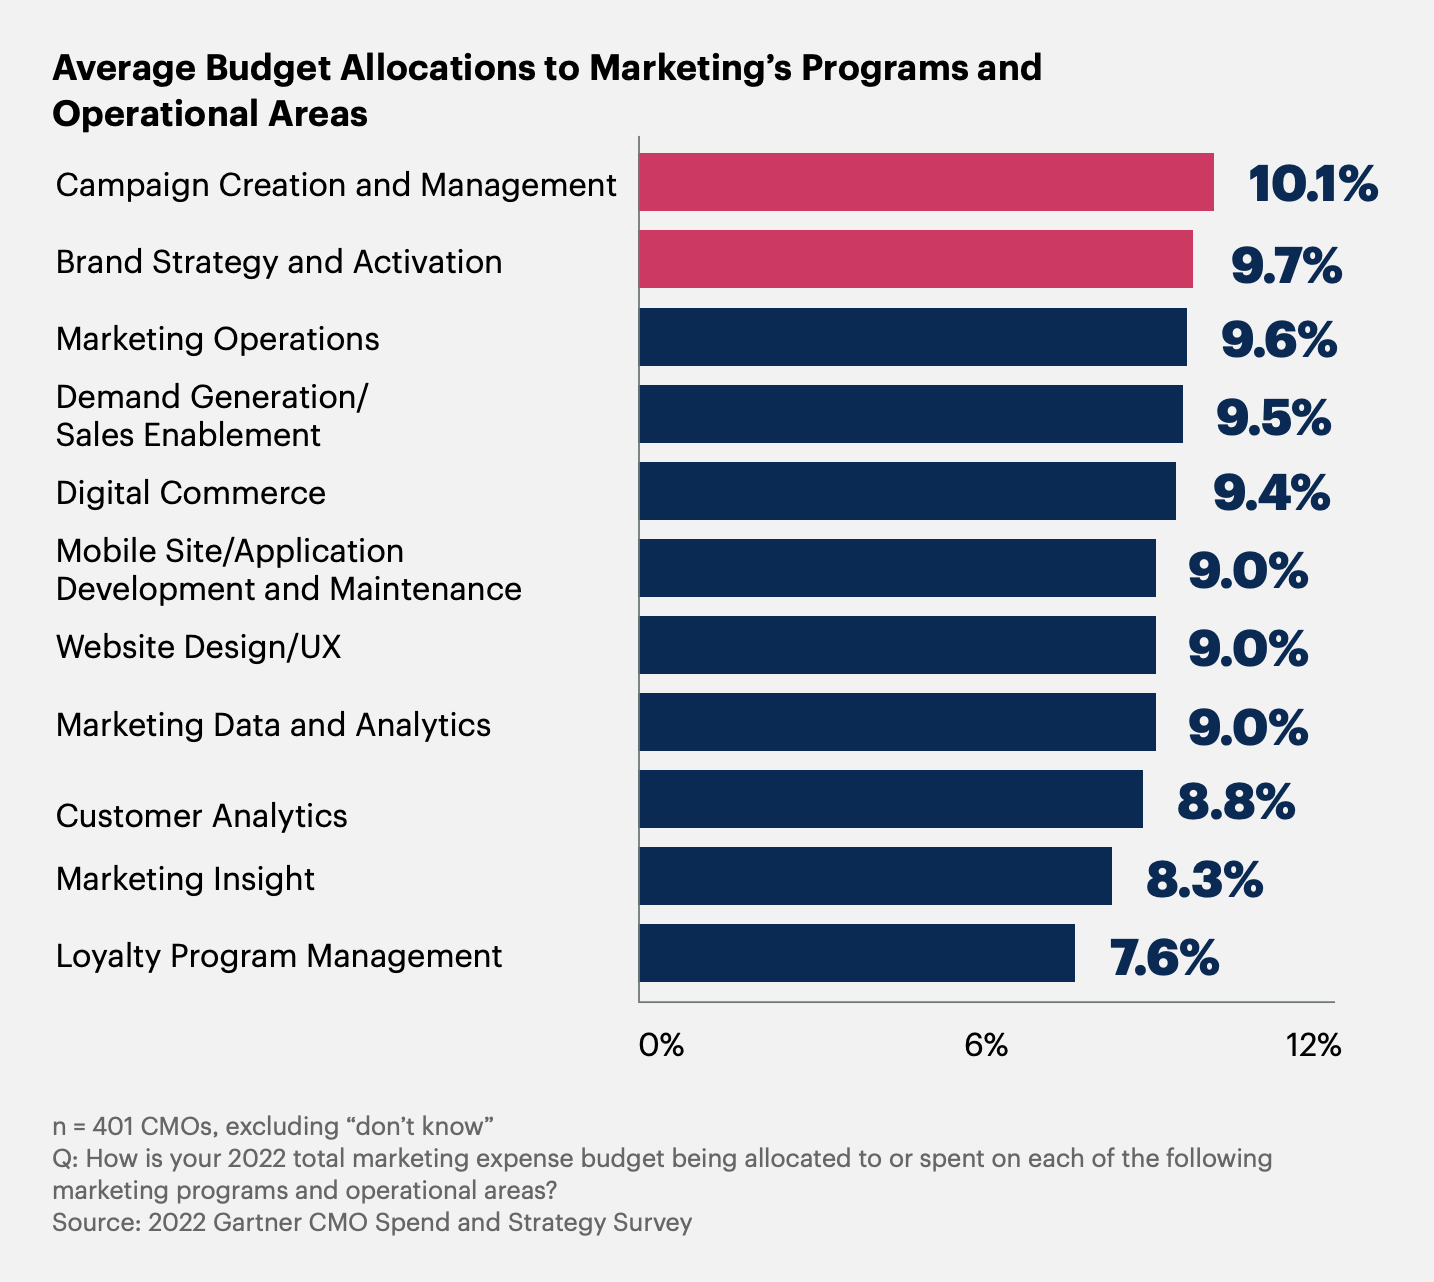 A bar chart showing the average budget allocations for various marketing activities.